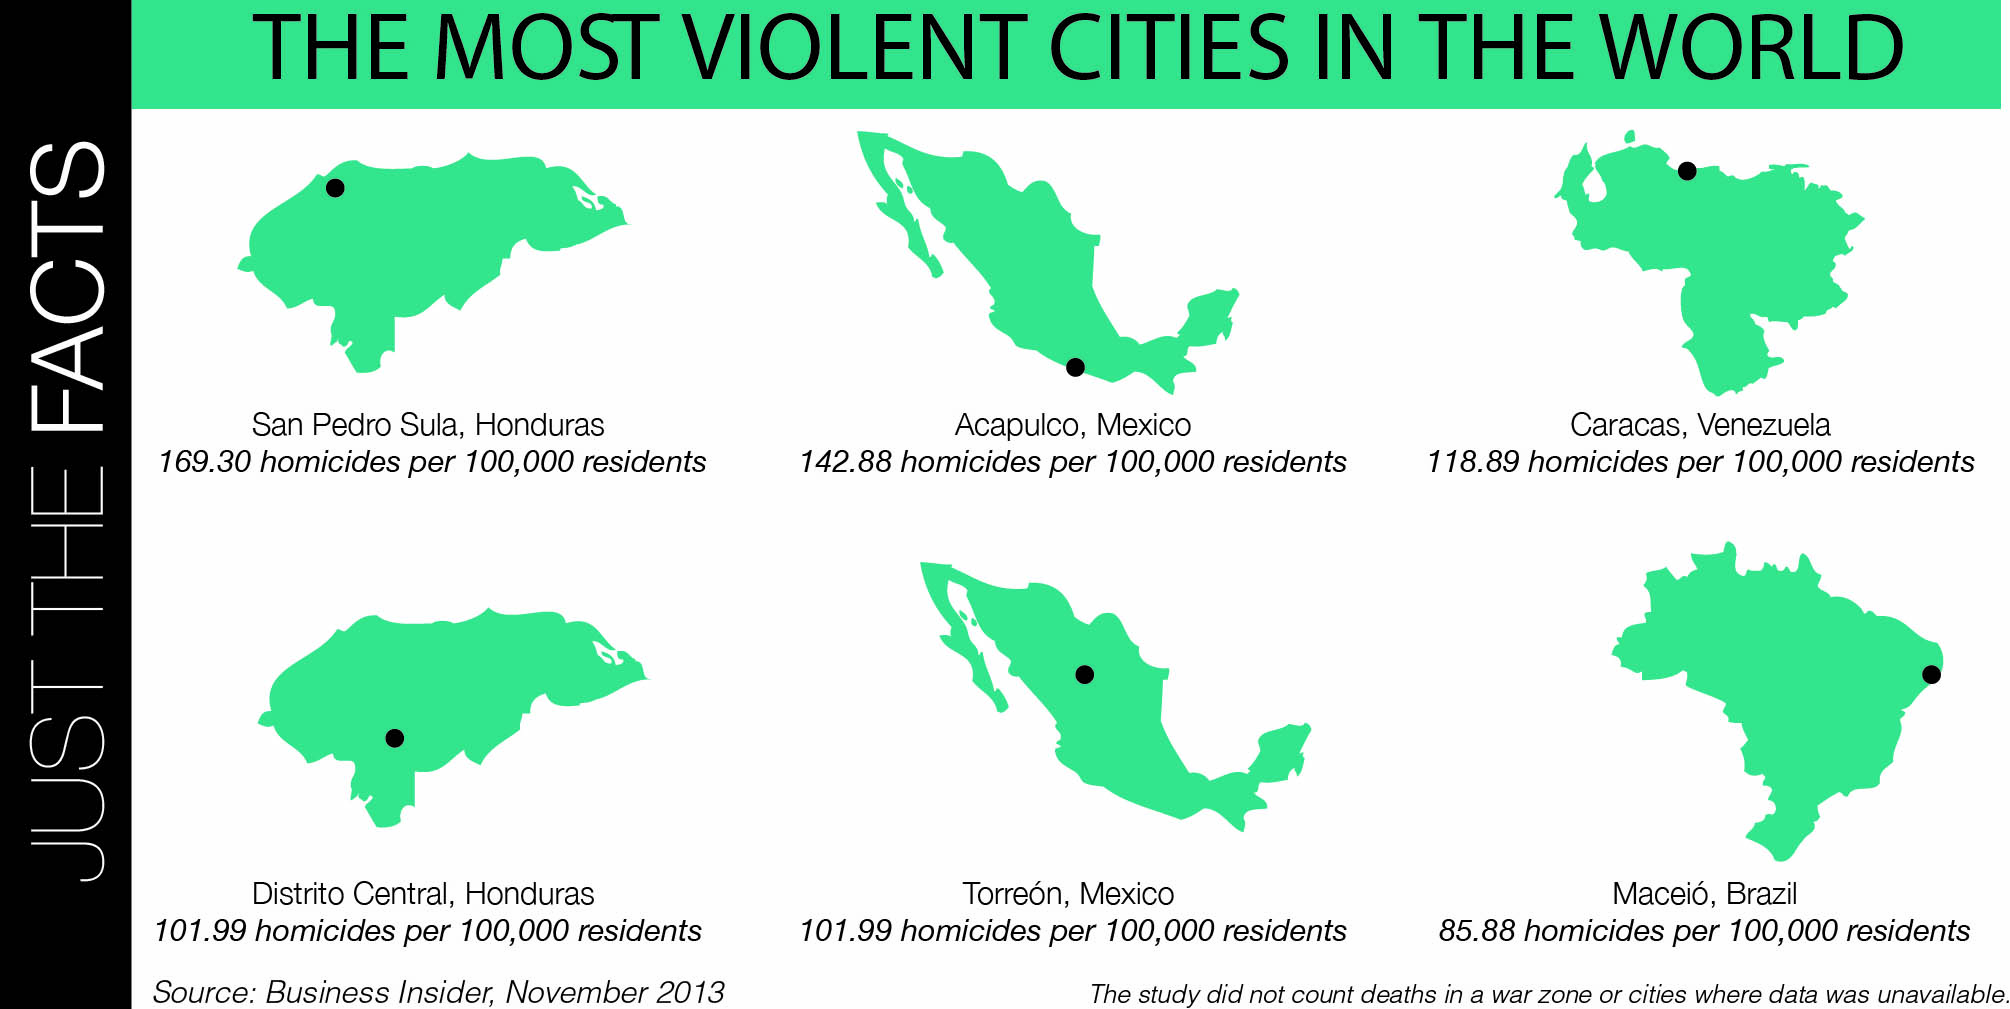 The most violent cities